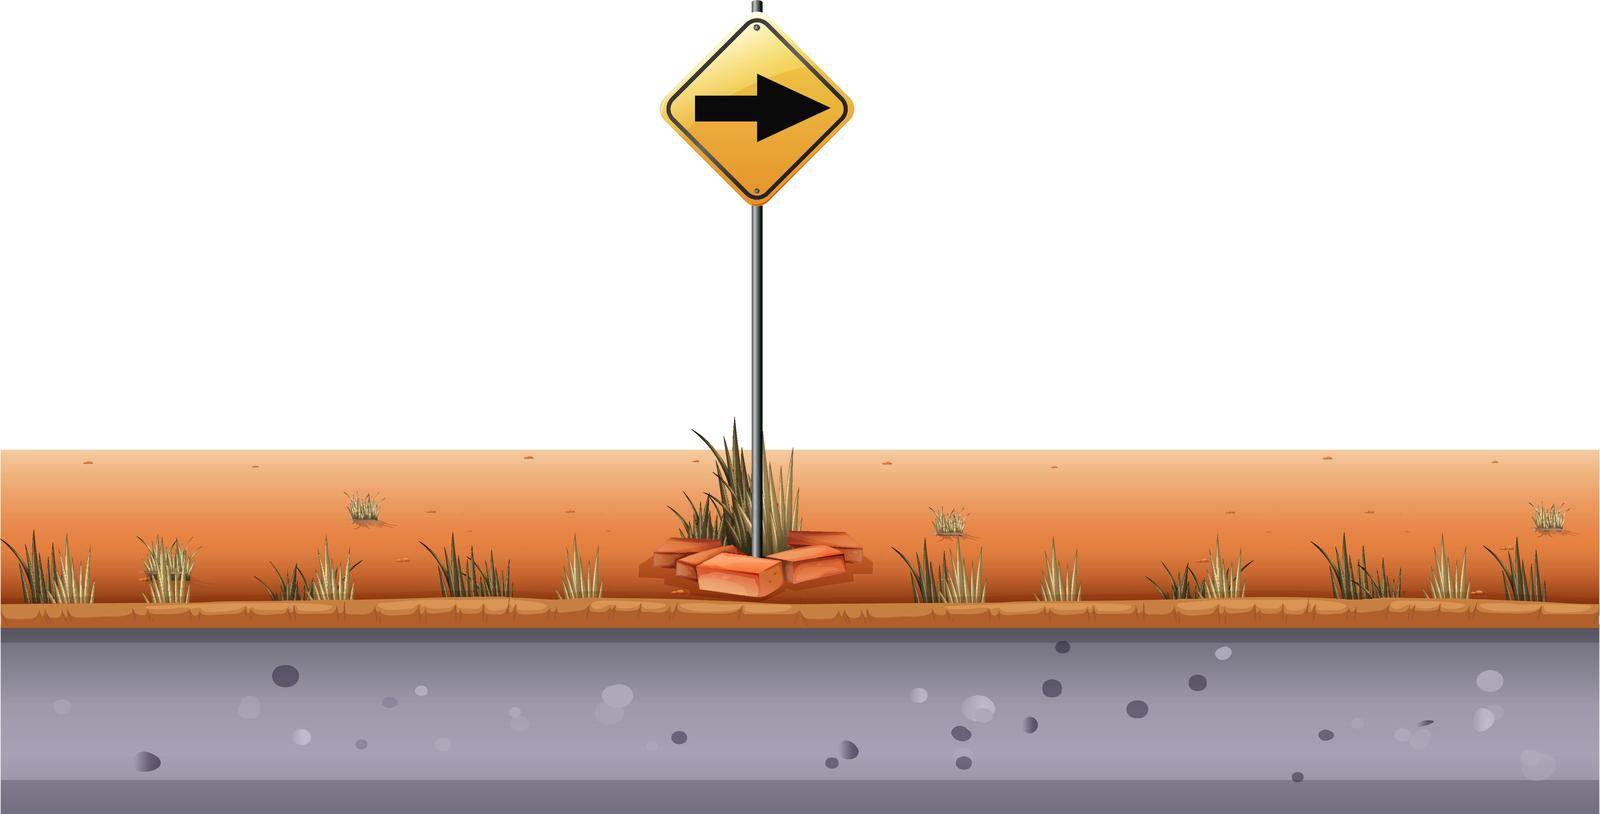 Road sign by the road illustration